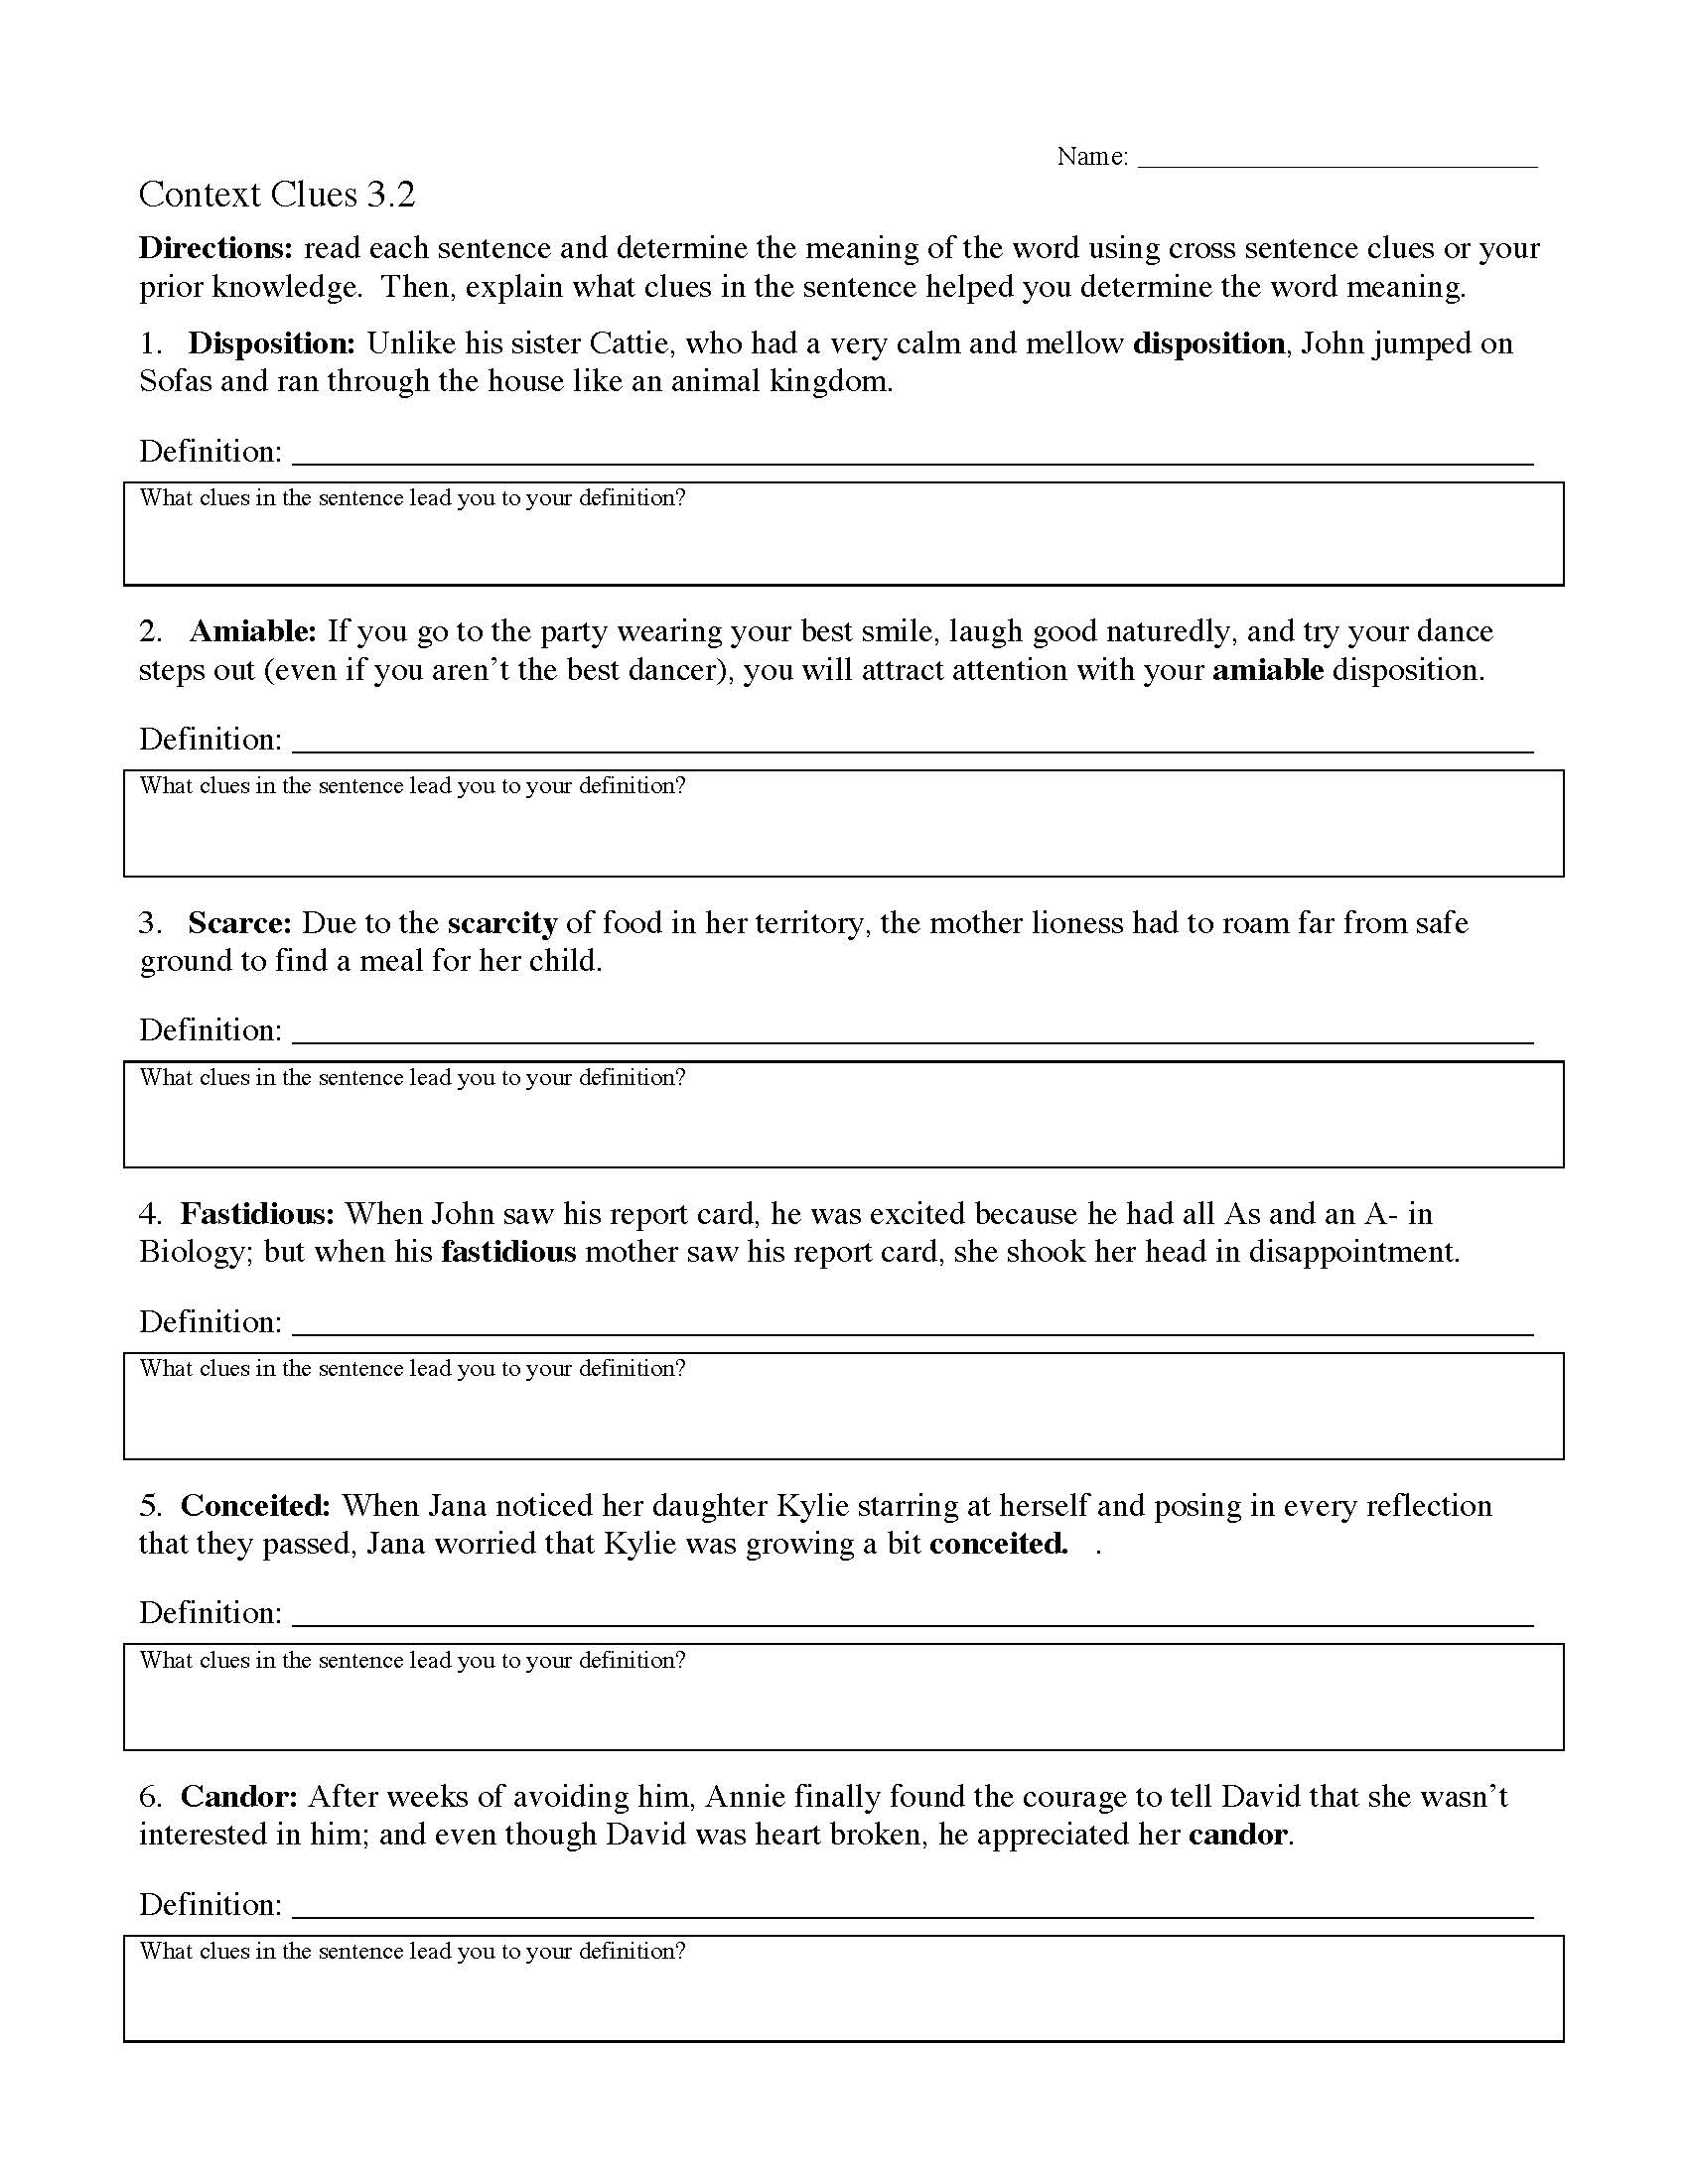 This is a preview image of Context Clues Worksheet 3.2. Click on it to enlarge it or view the source file.